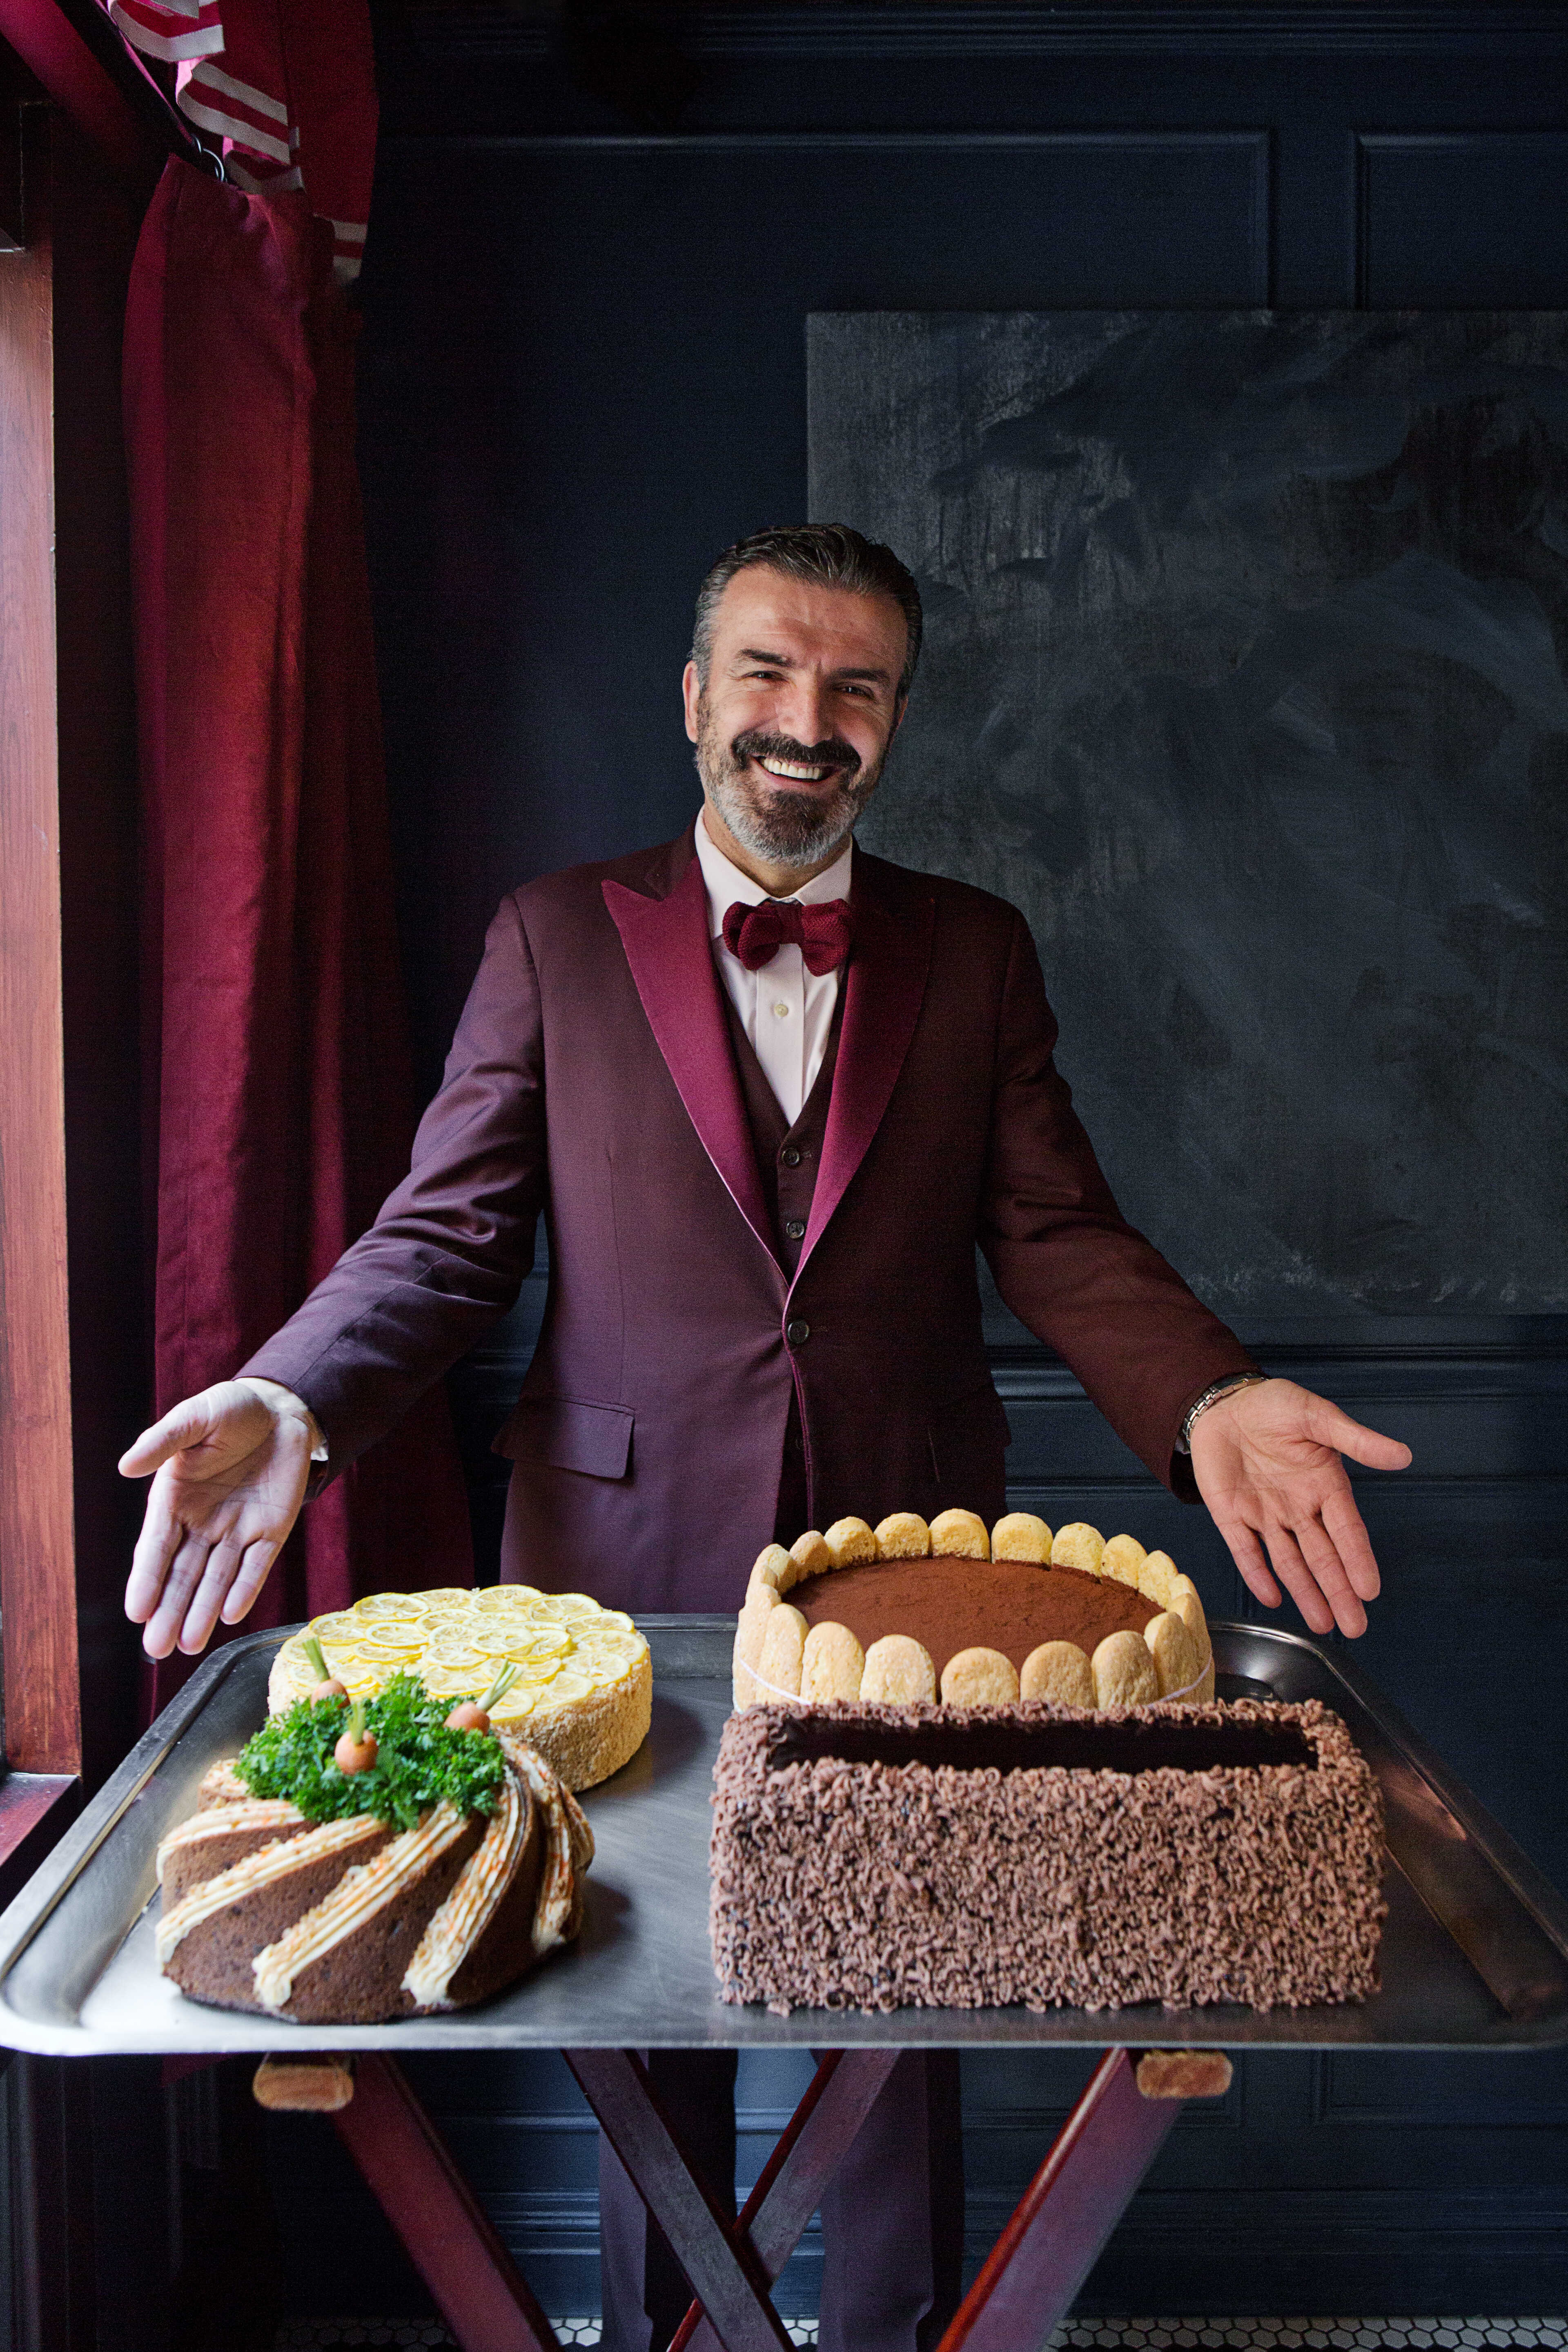 Waiter smiling while showcasing a large platter of desserts